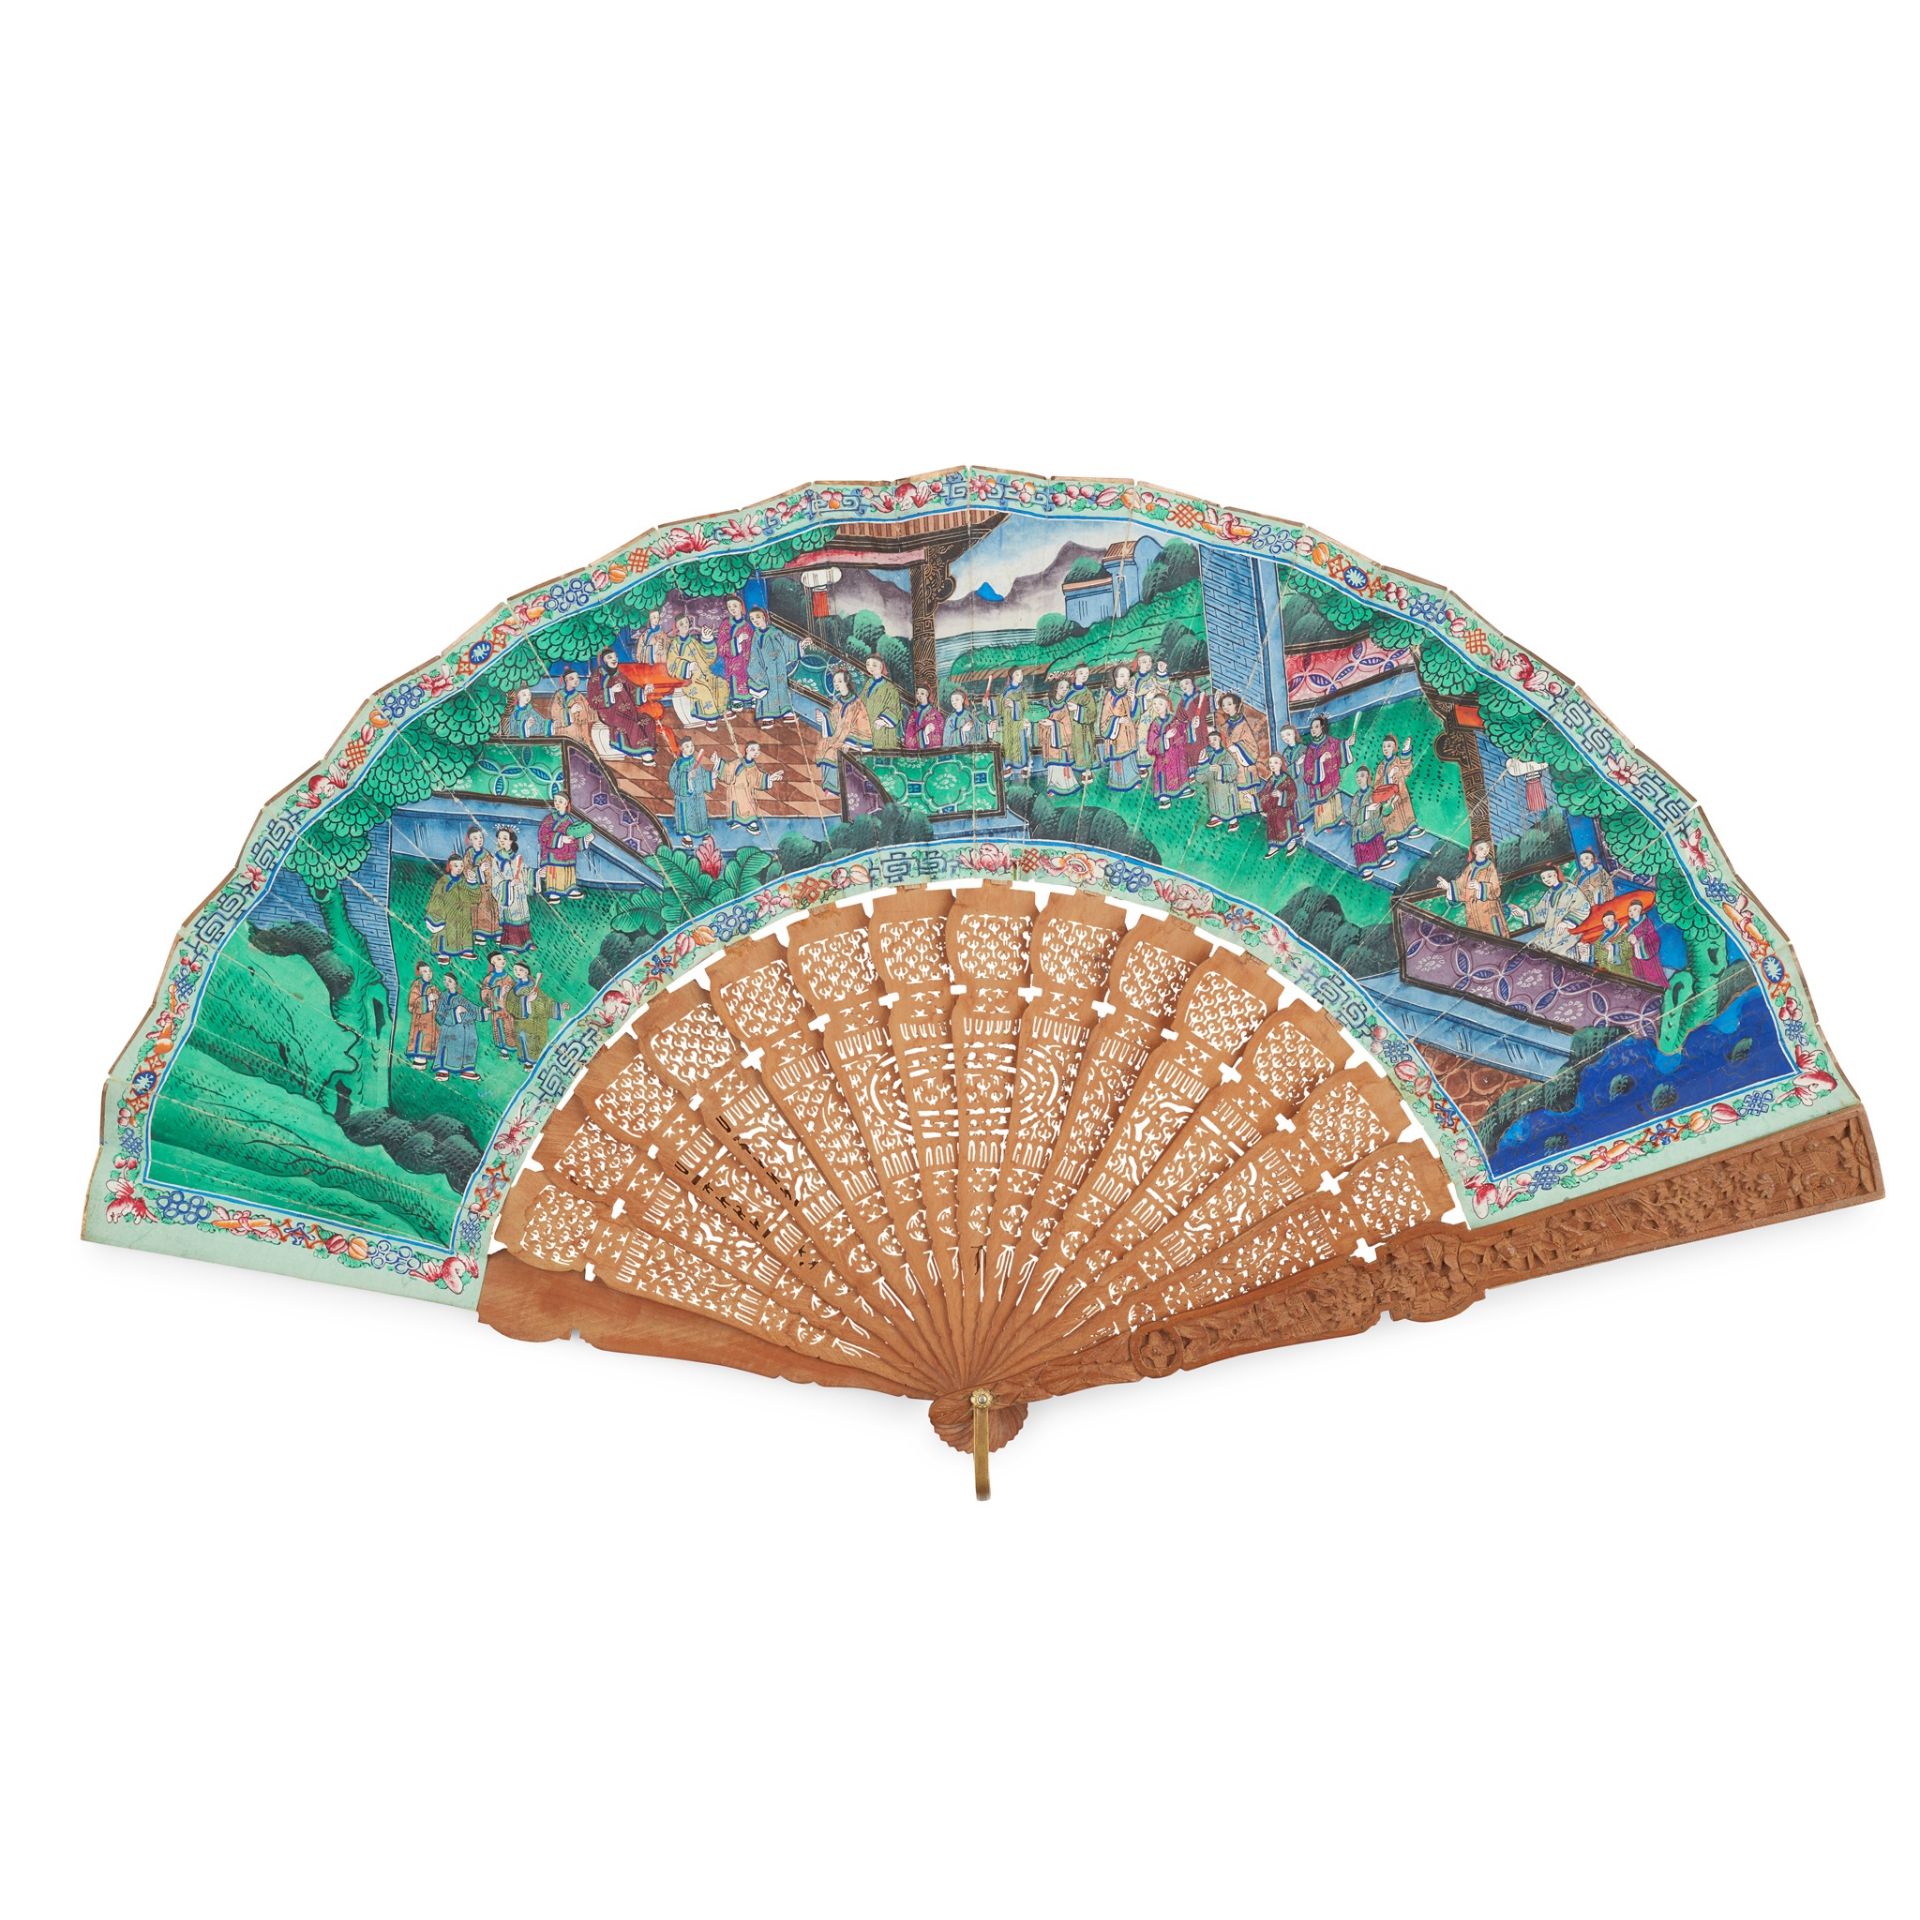 Y CANTON SANDALWOOD AND PAPER 'THOUSAND FACES' FAN QING DYNASTY, 19TH CENTURY - Image 2 of 2